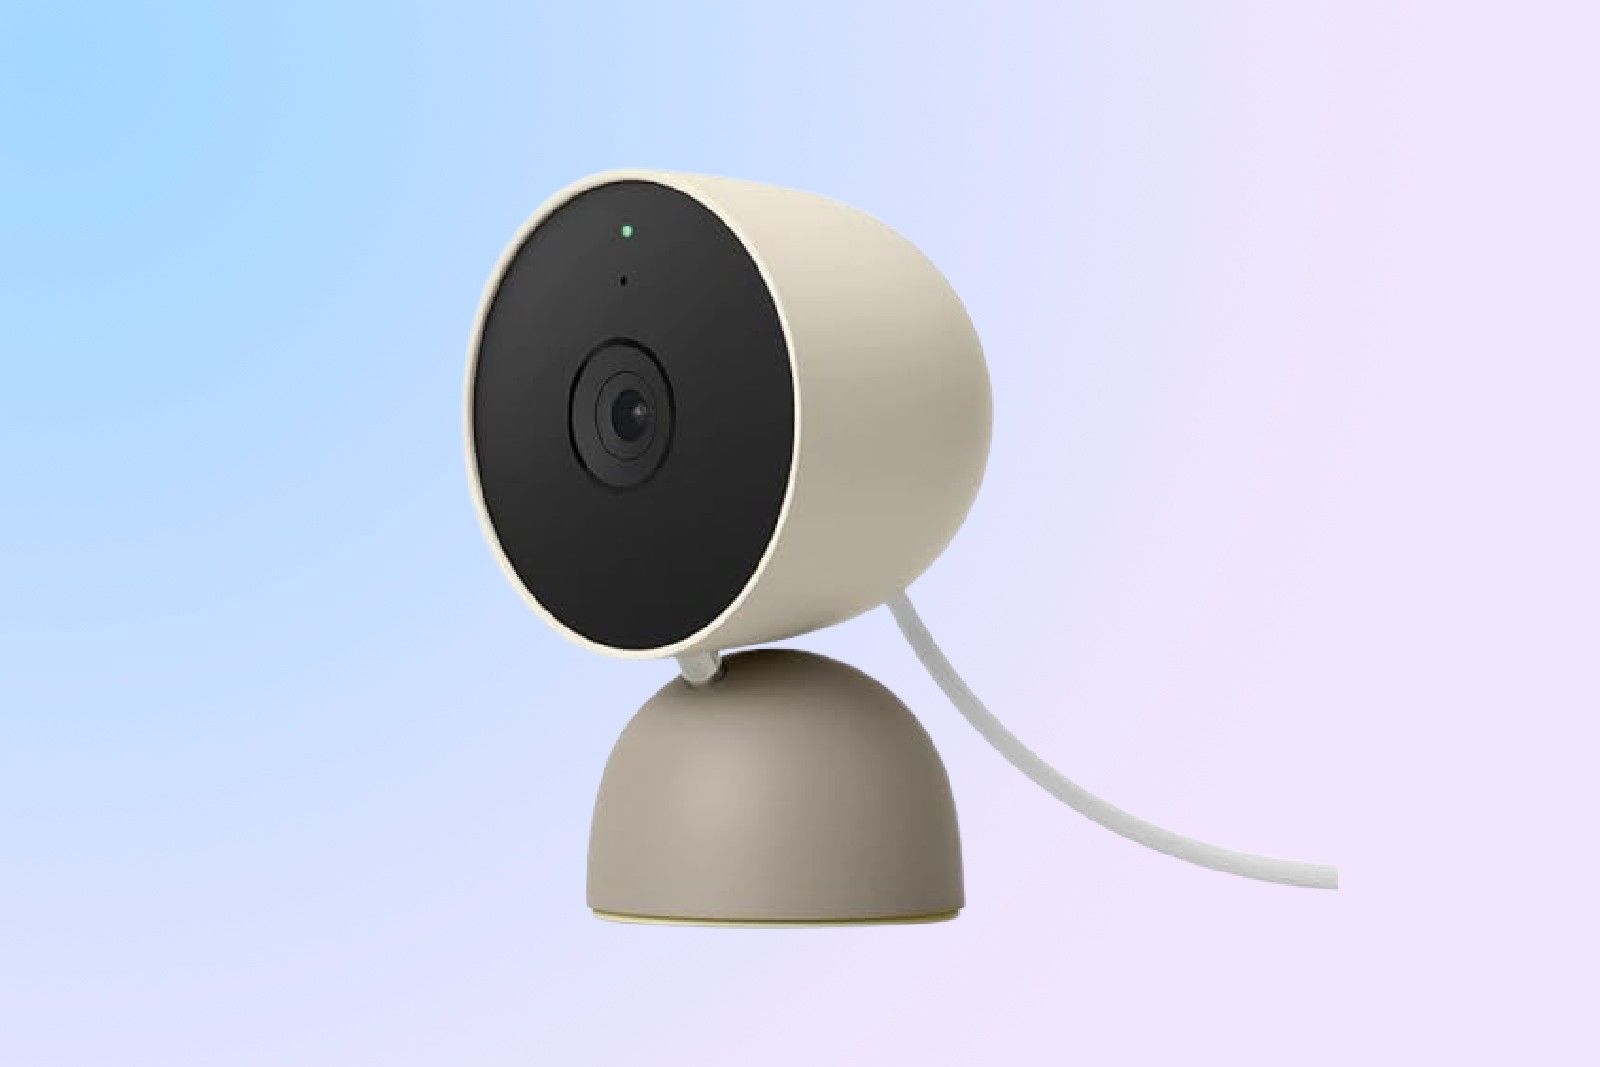 Google Nest Security Cam (Wired)